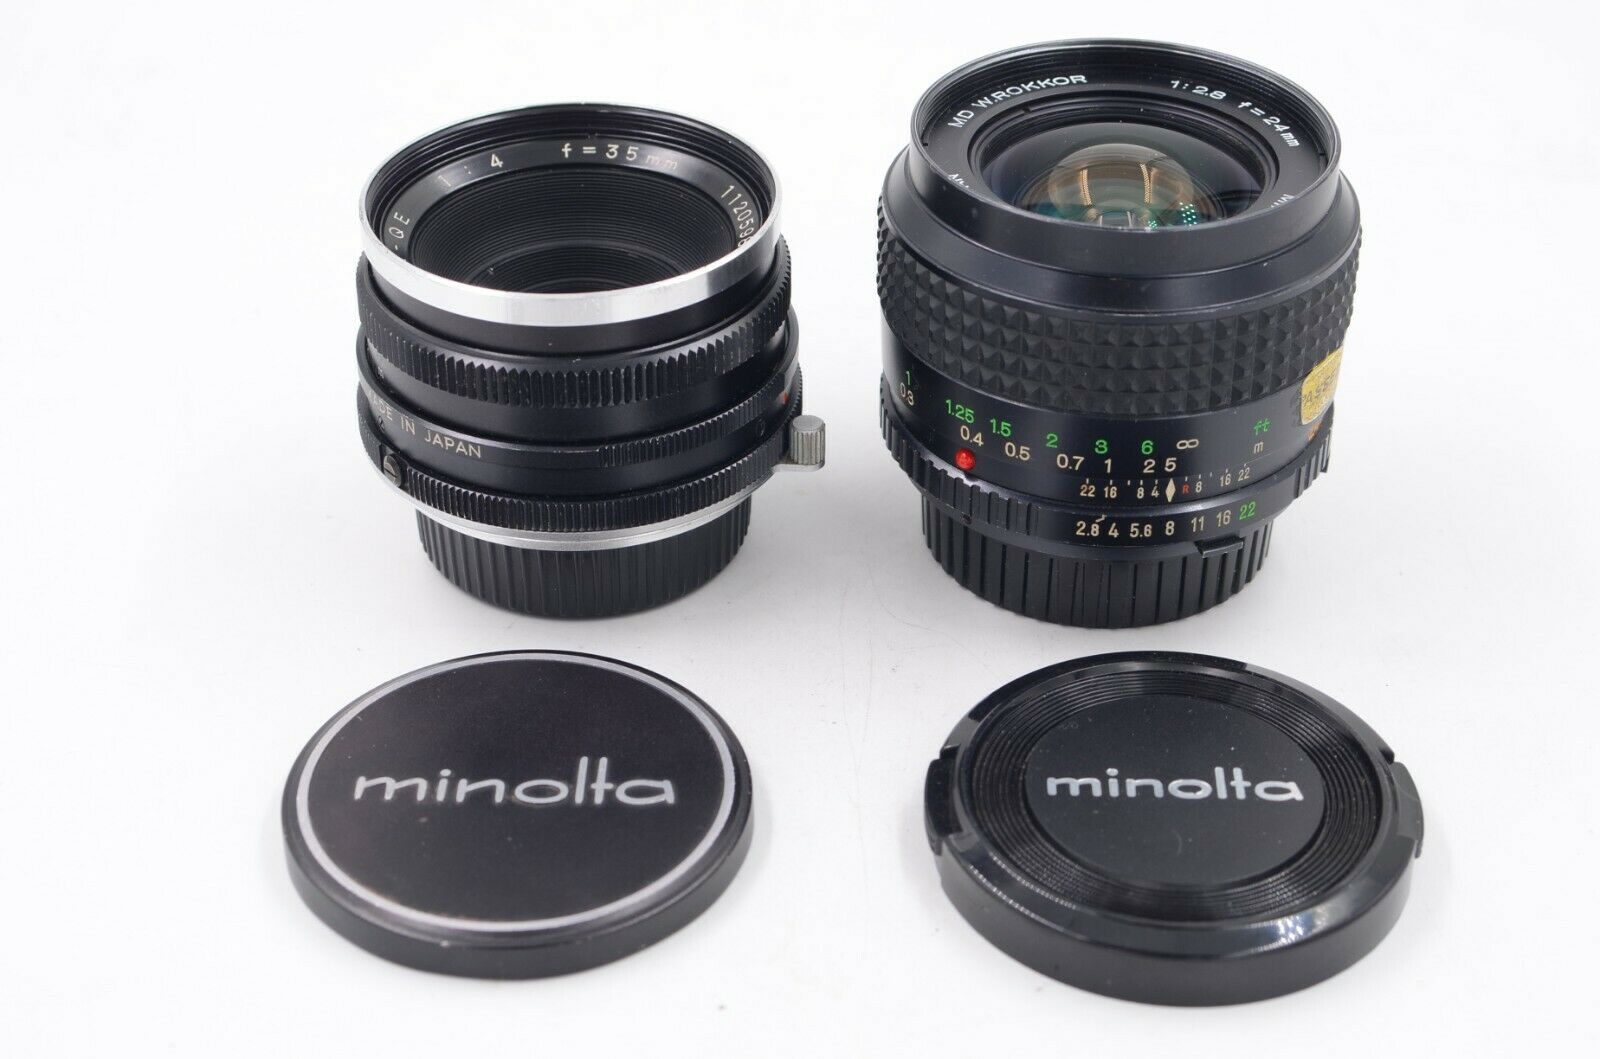 Two Minolta Manual Focus Wide Angle Lenses: 24mm F2.8 And 35mm F4